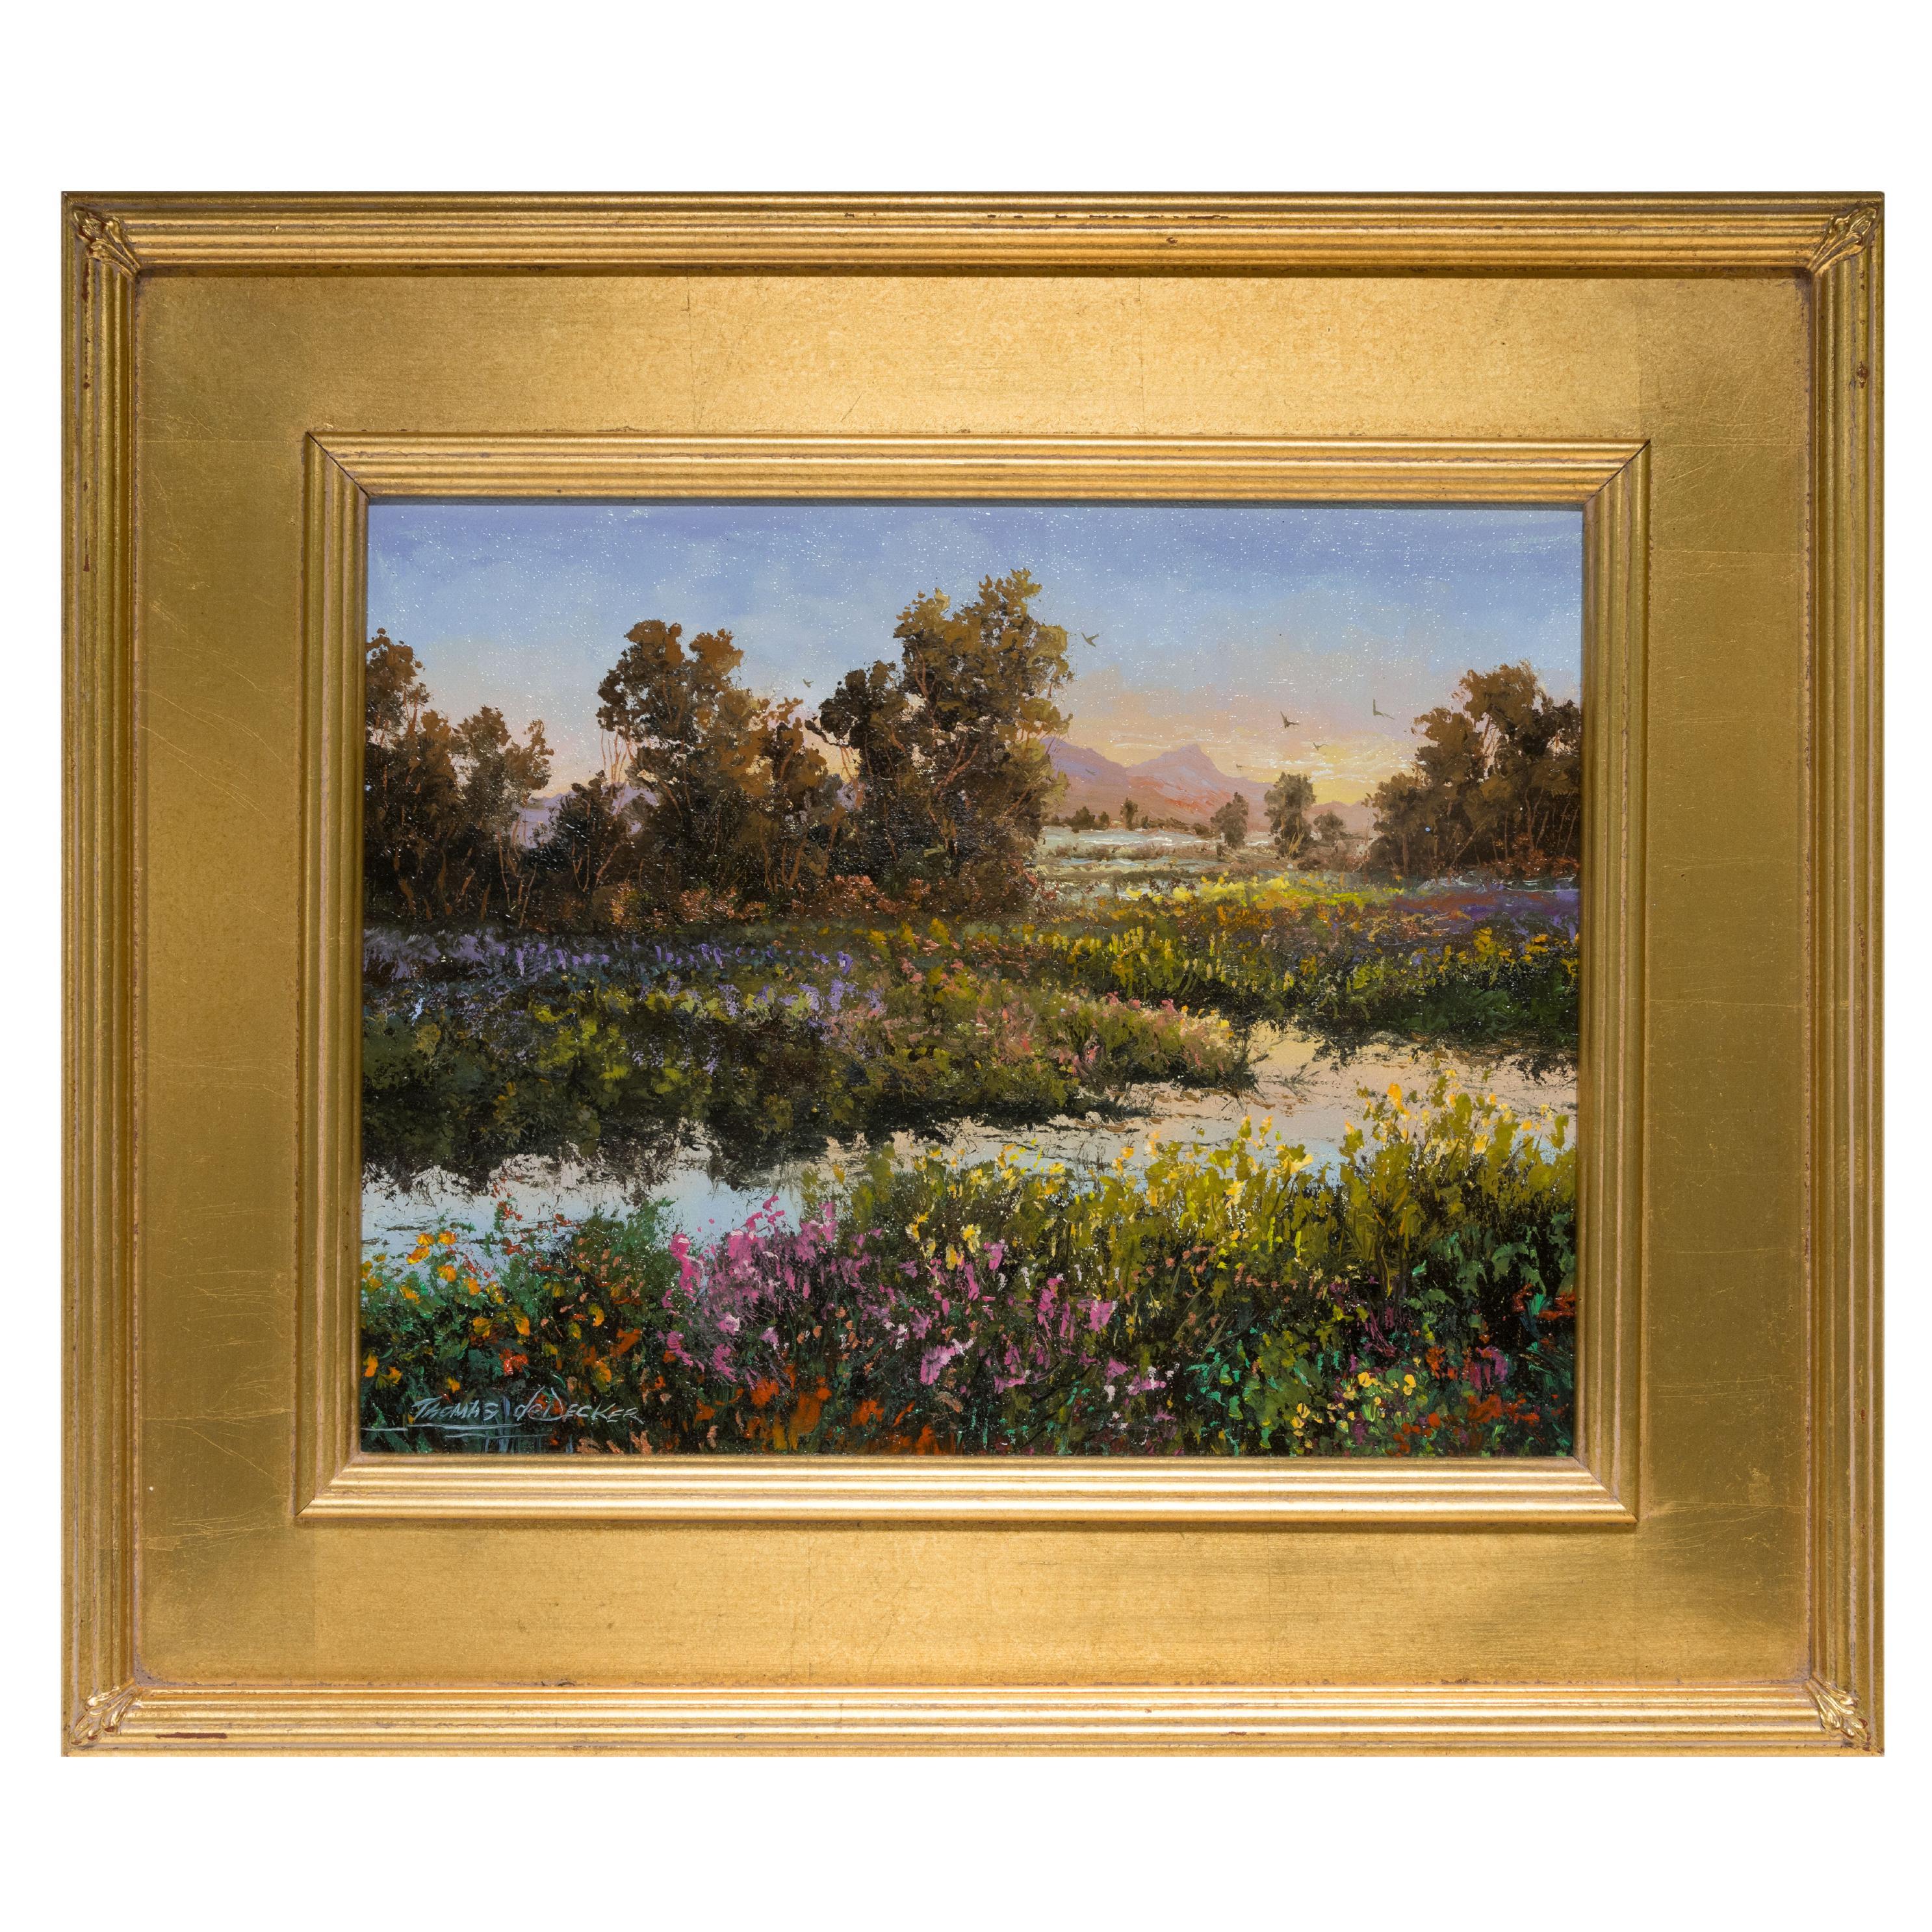 Original Painting "Spring" by Thomas deDecker For Sale